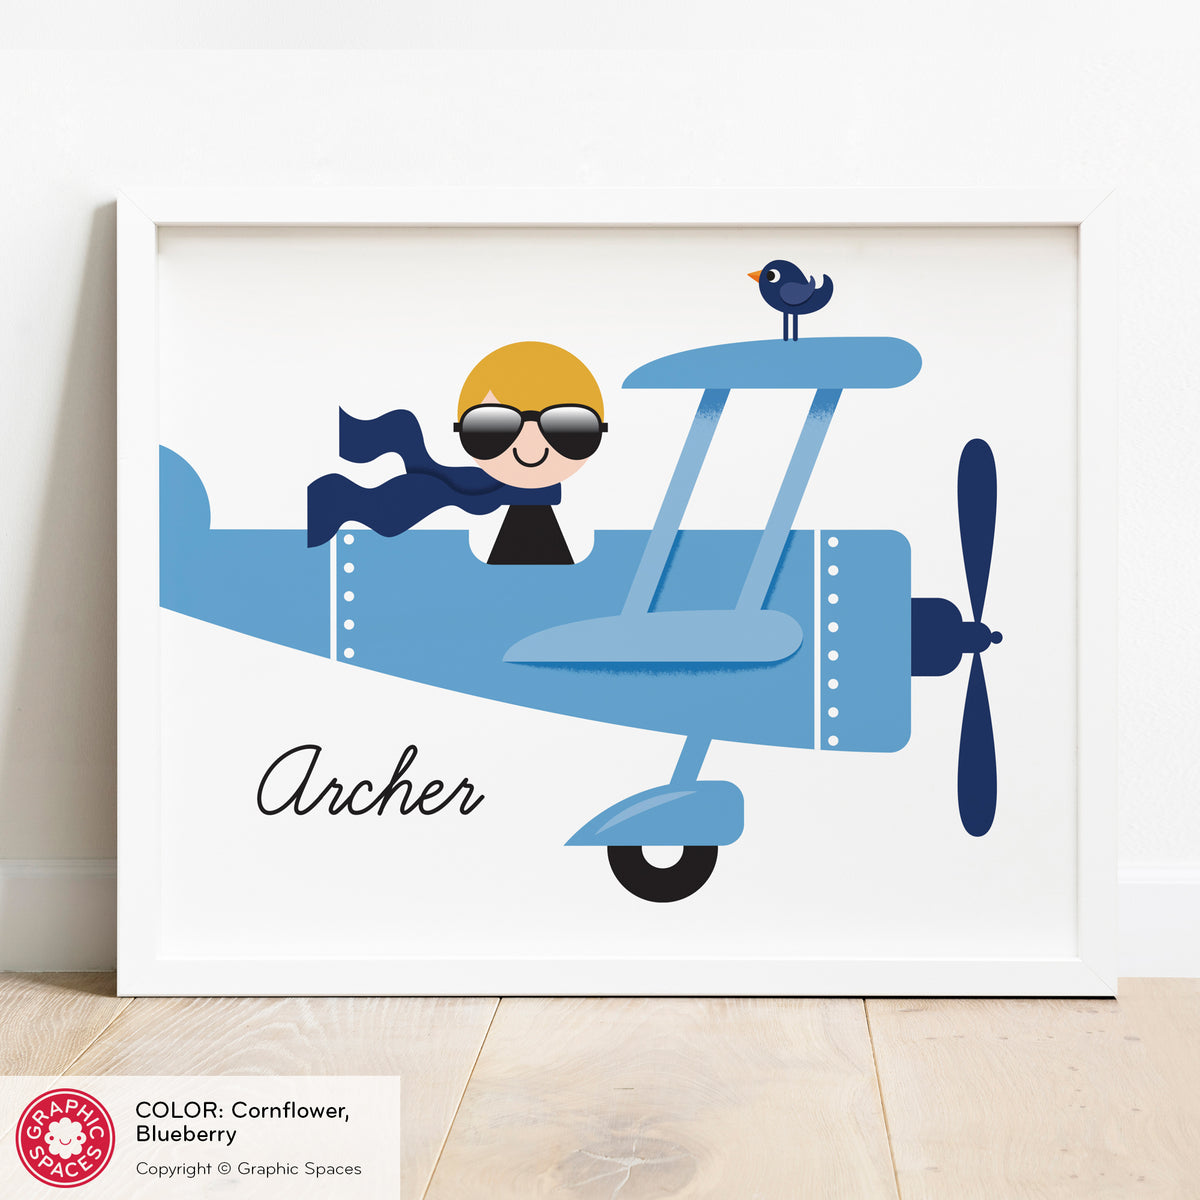 Airplane Boy personalized art print in sample frame.